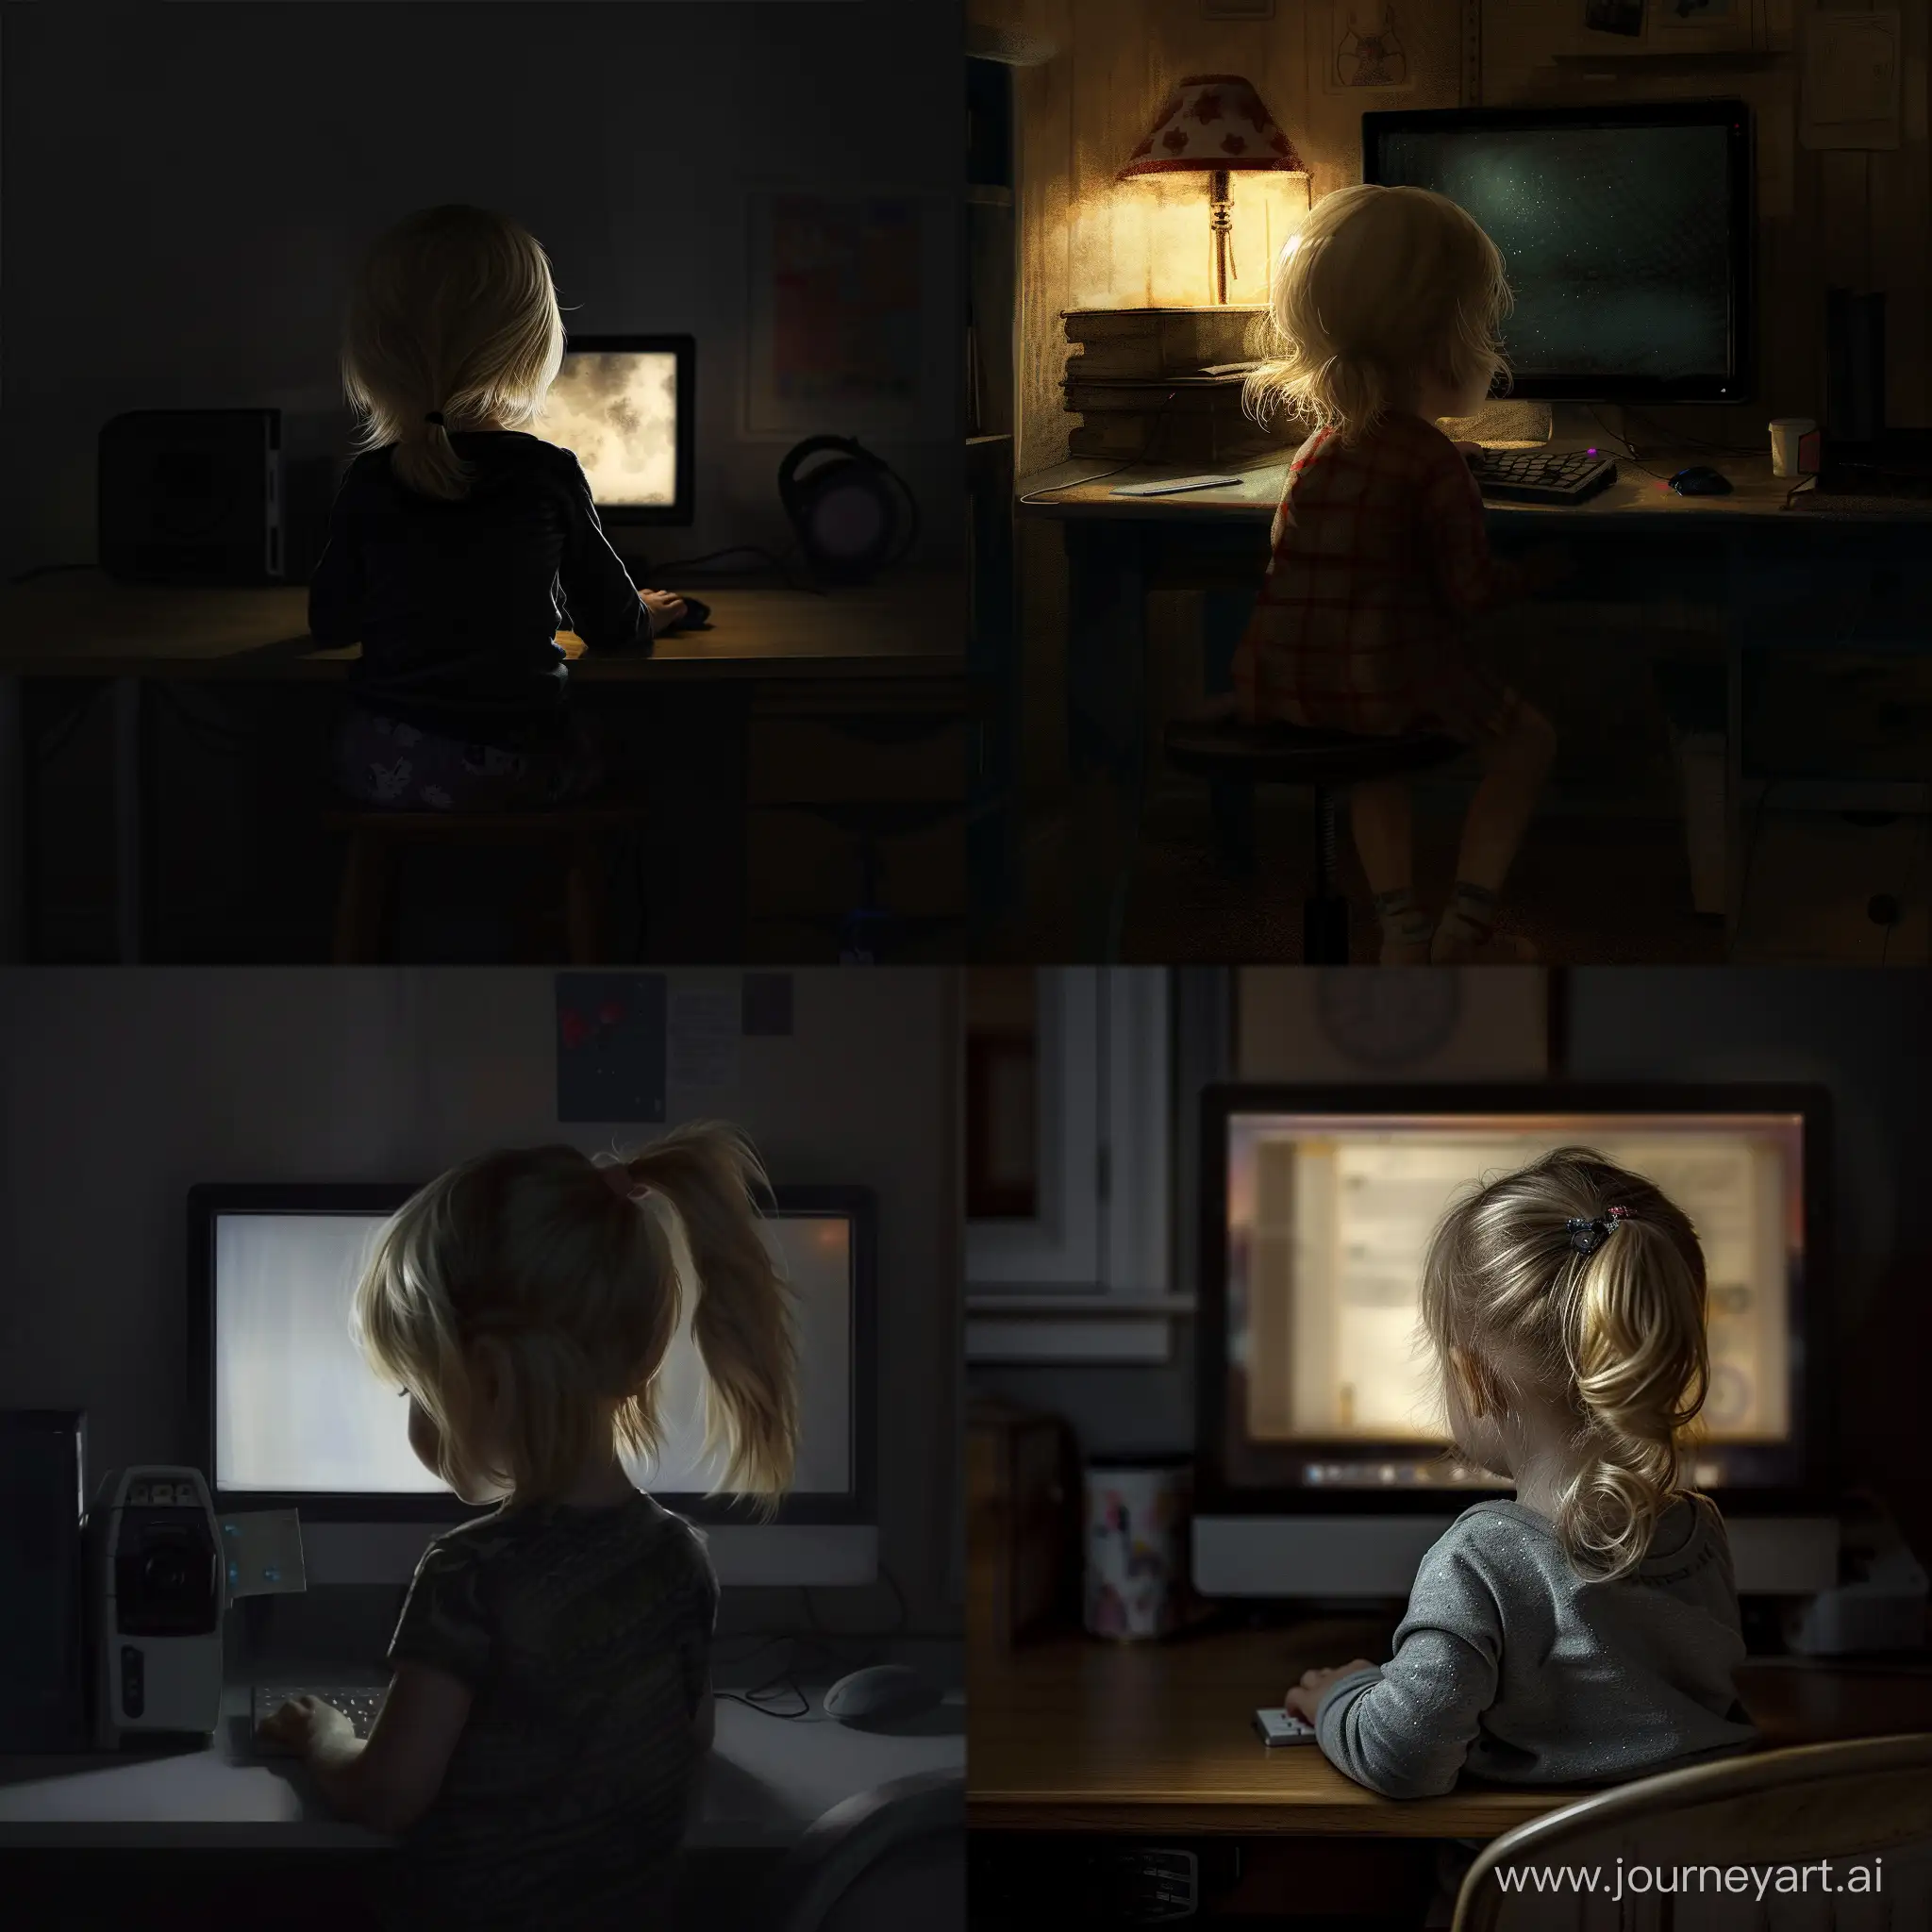 Blonde-Girl-Using-Computer-in-Dimly-Lit-Room